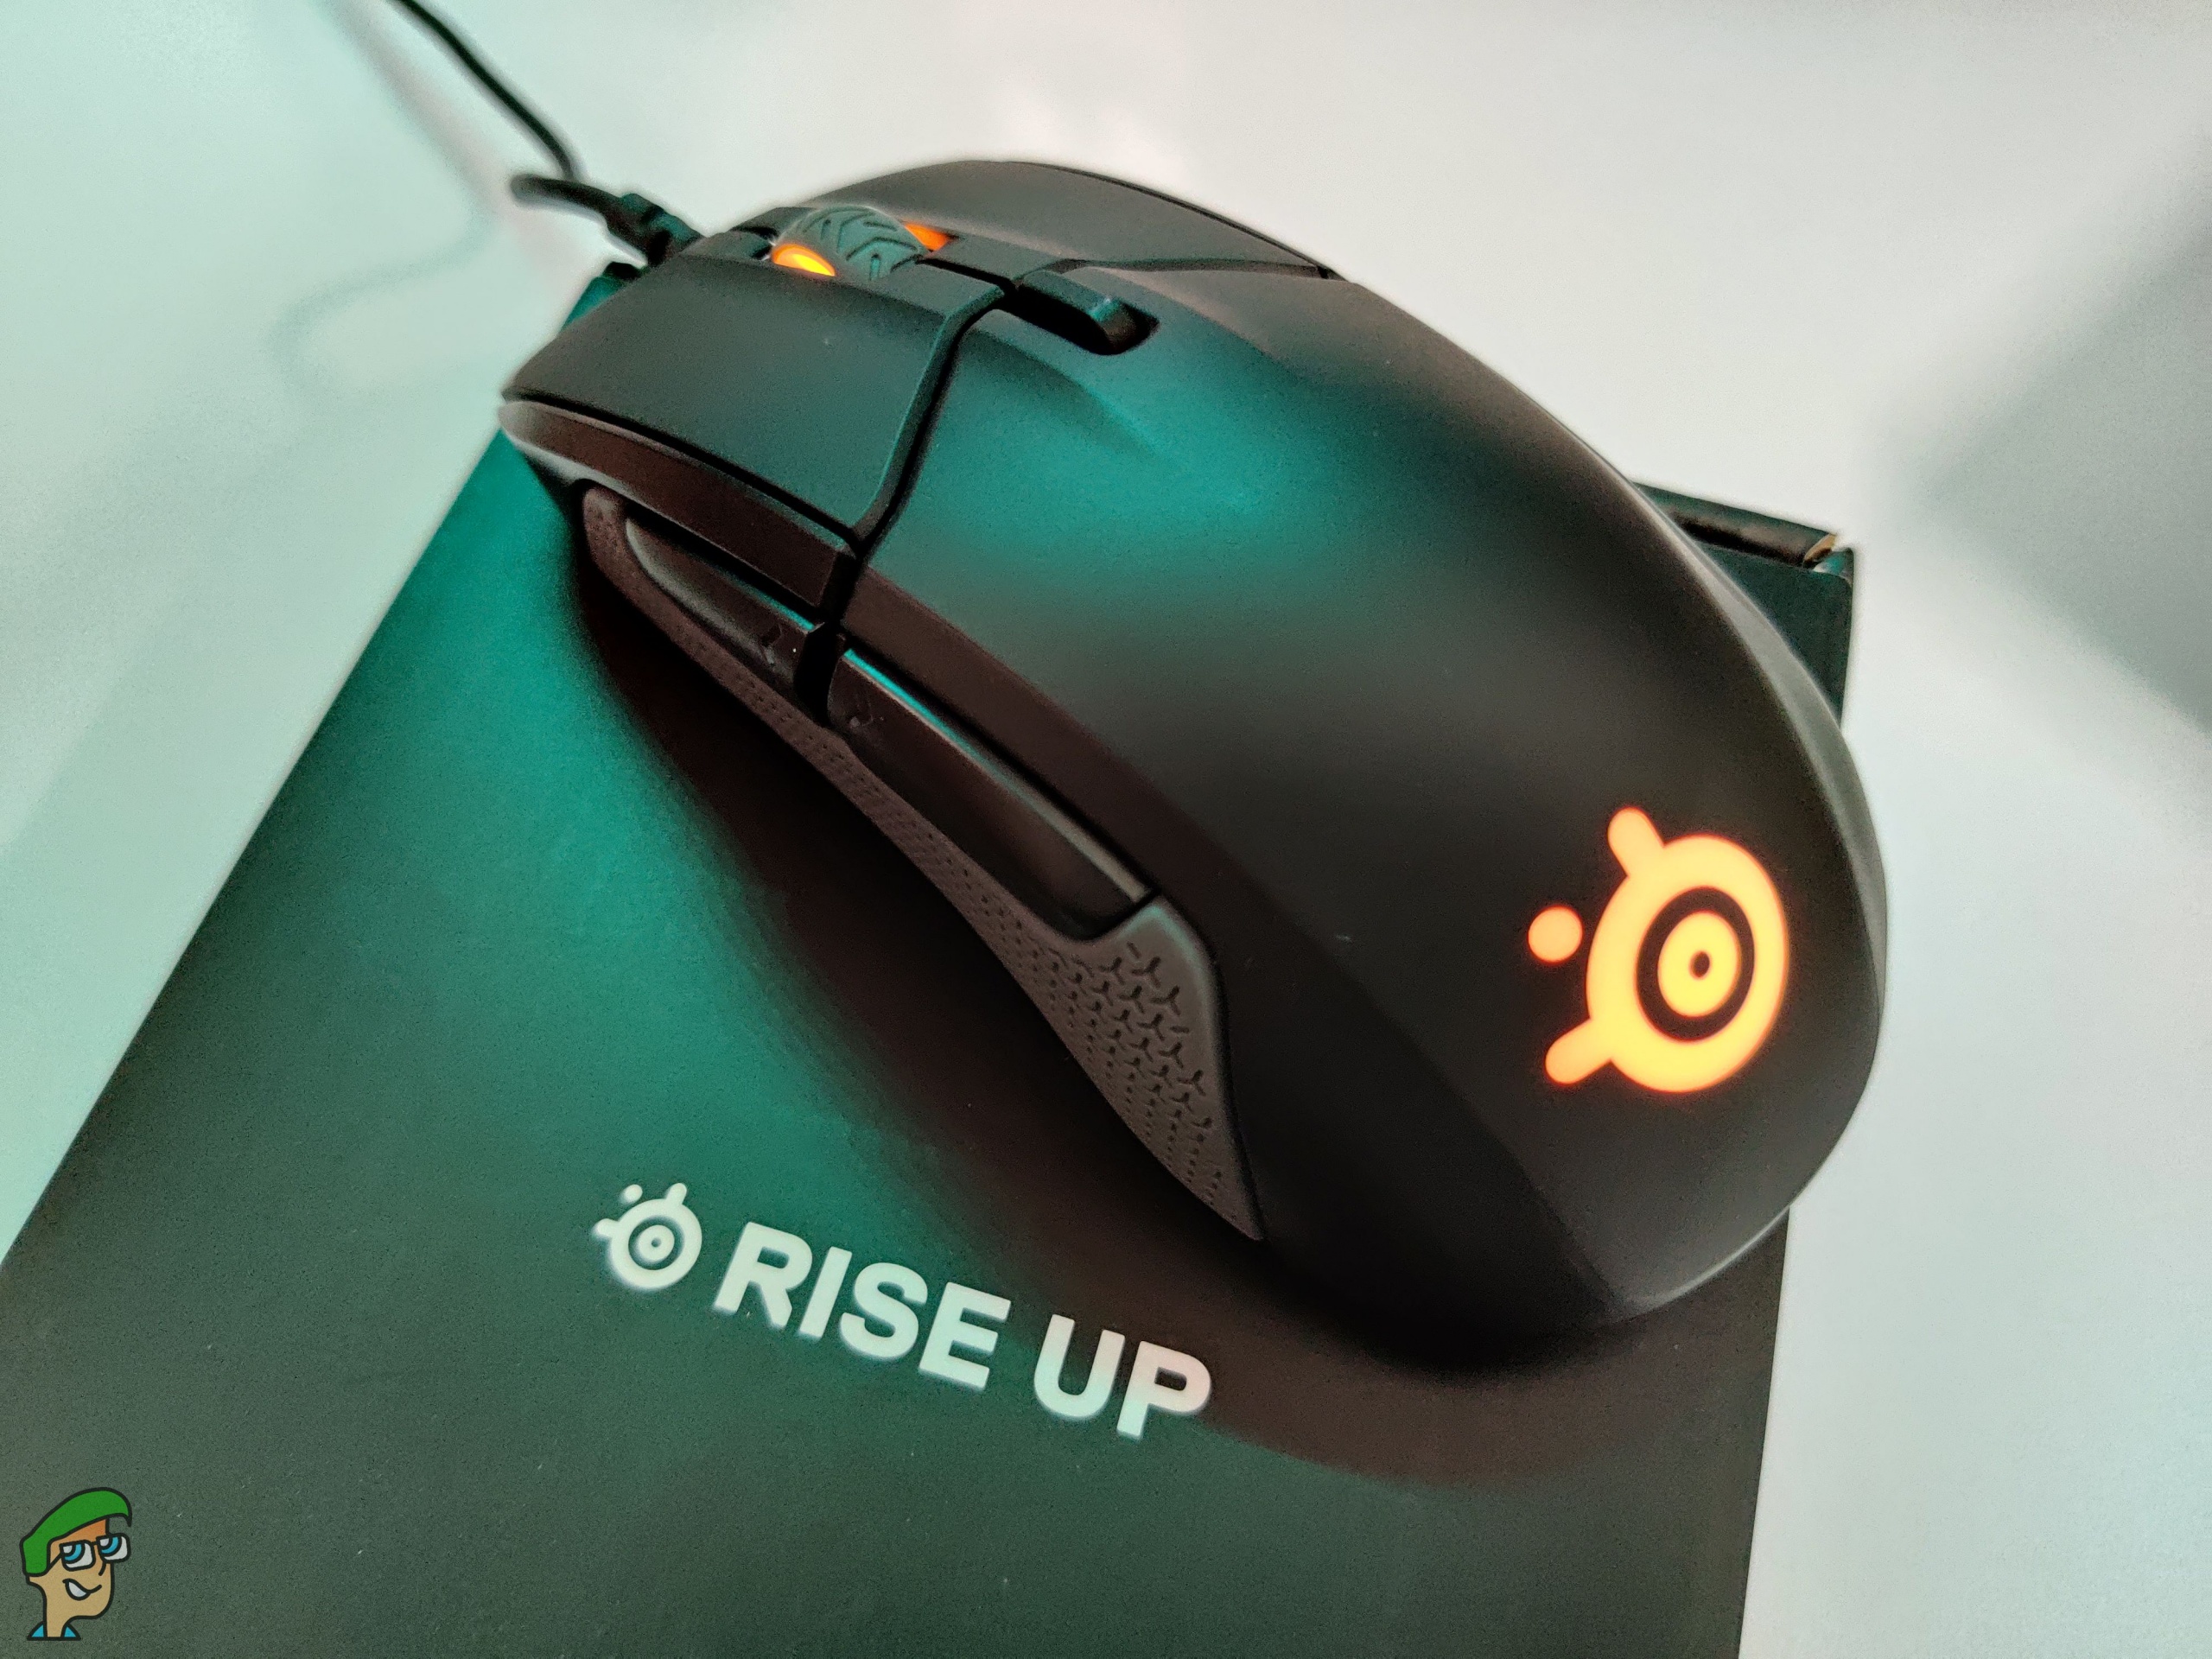 Análise do mouse para jogos SteelSeries Rival 310